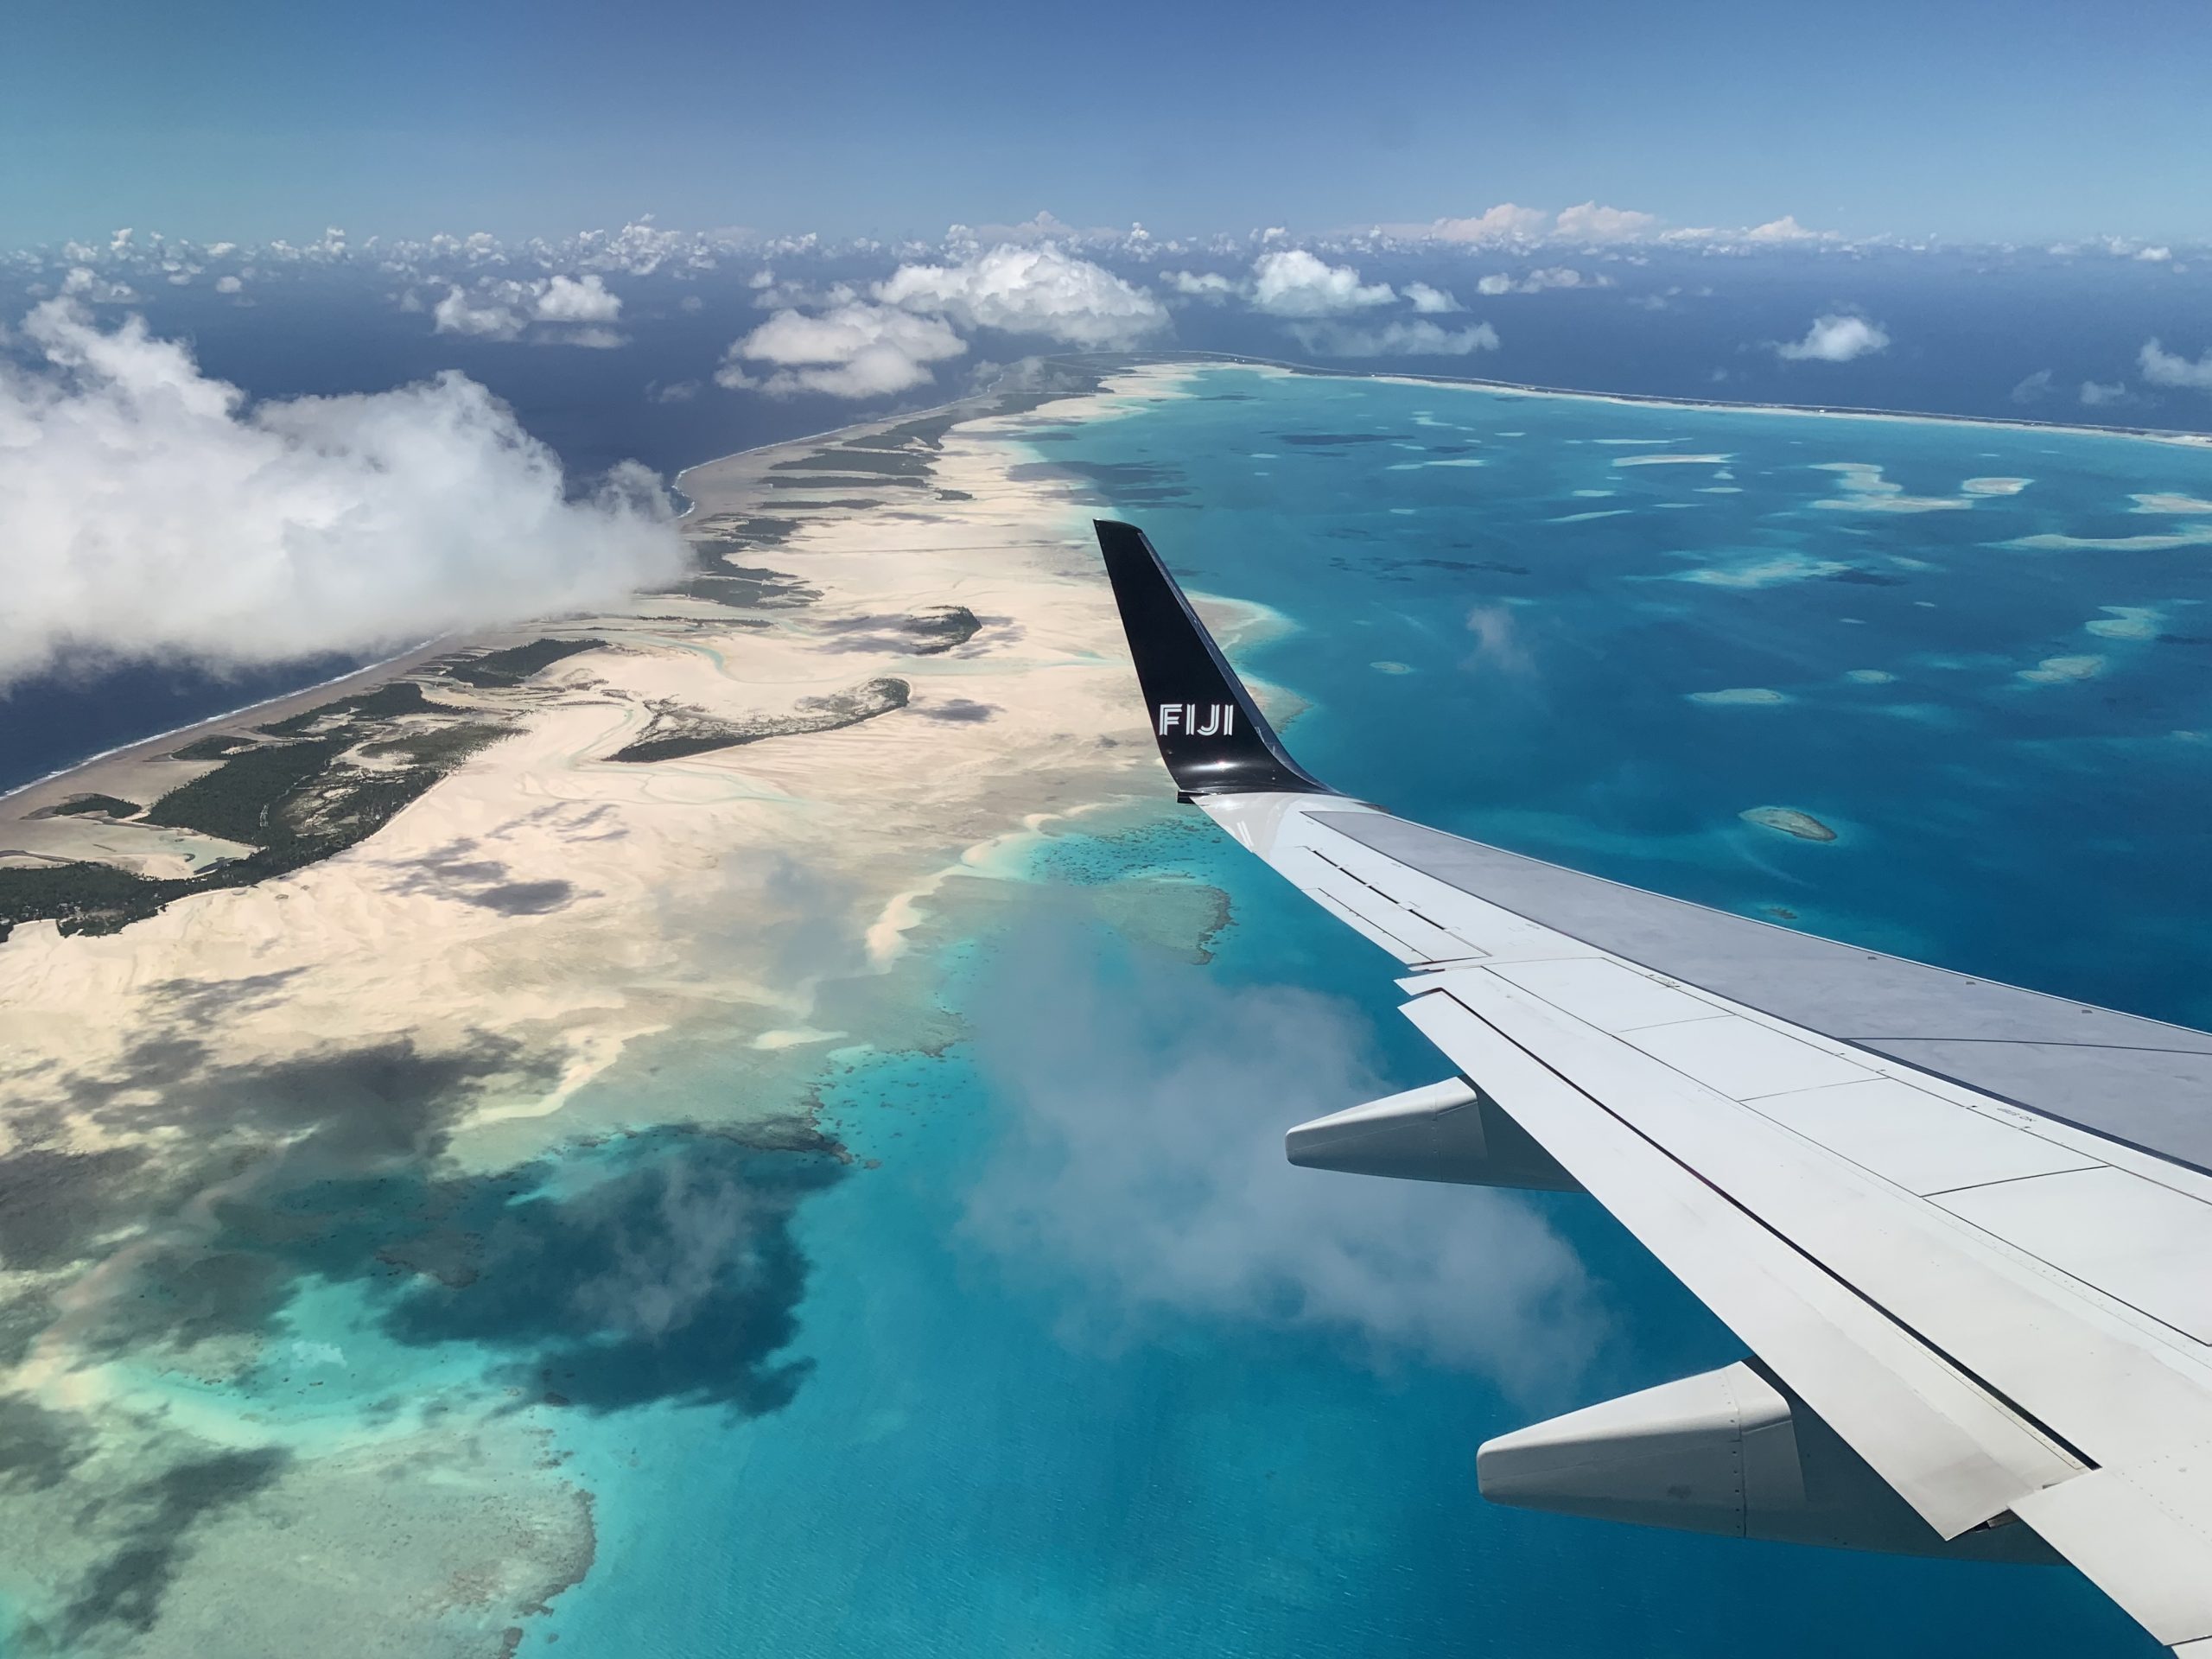 Image shows the view from an airplane over the wing. There are clouds in the mid distance and below there is the ocean in varying shades of blue, golden sands, and green vegetation.